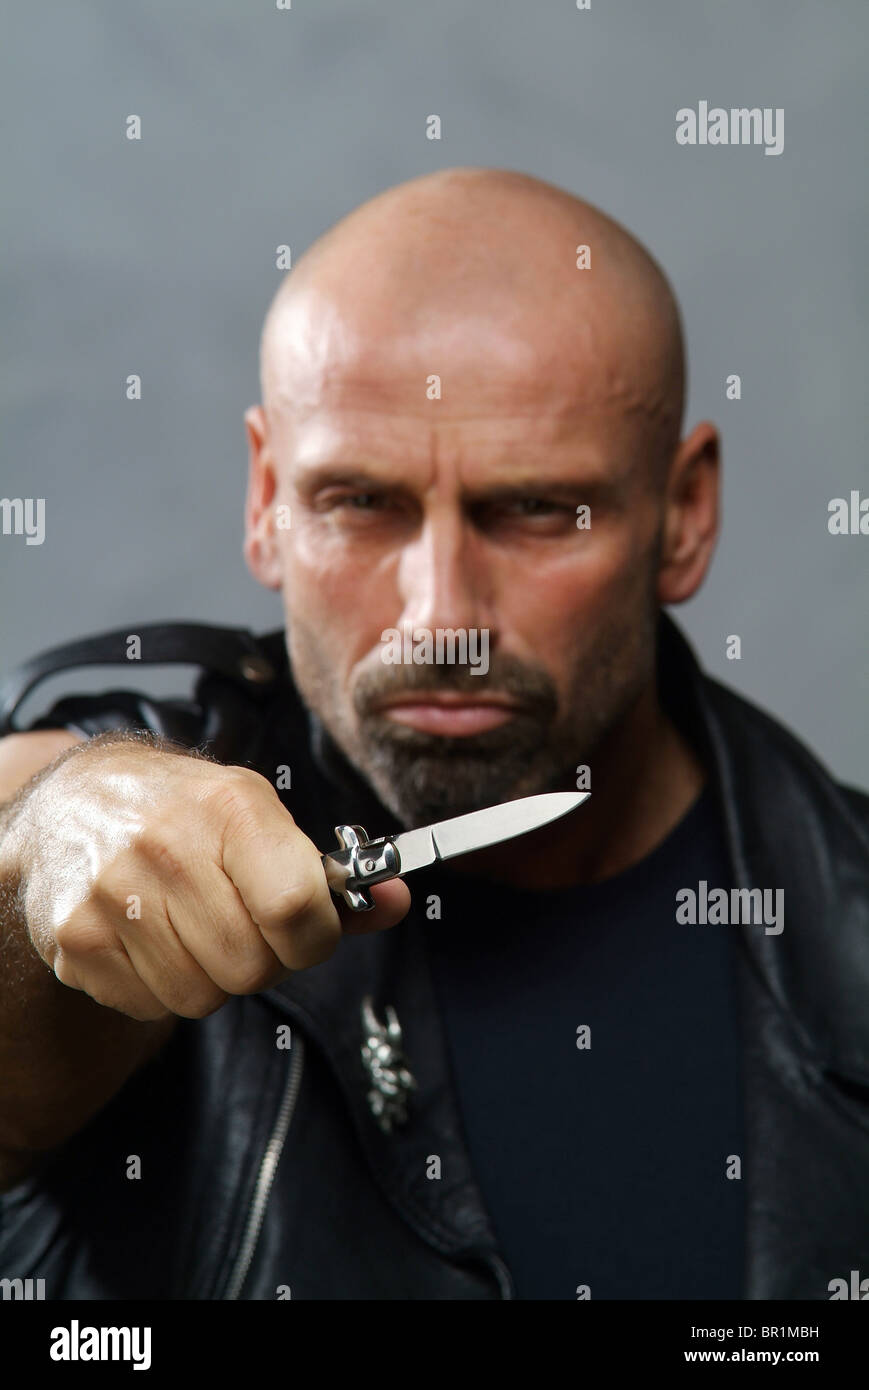 Man holding a knife Stock Photo